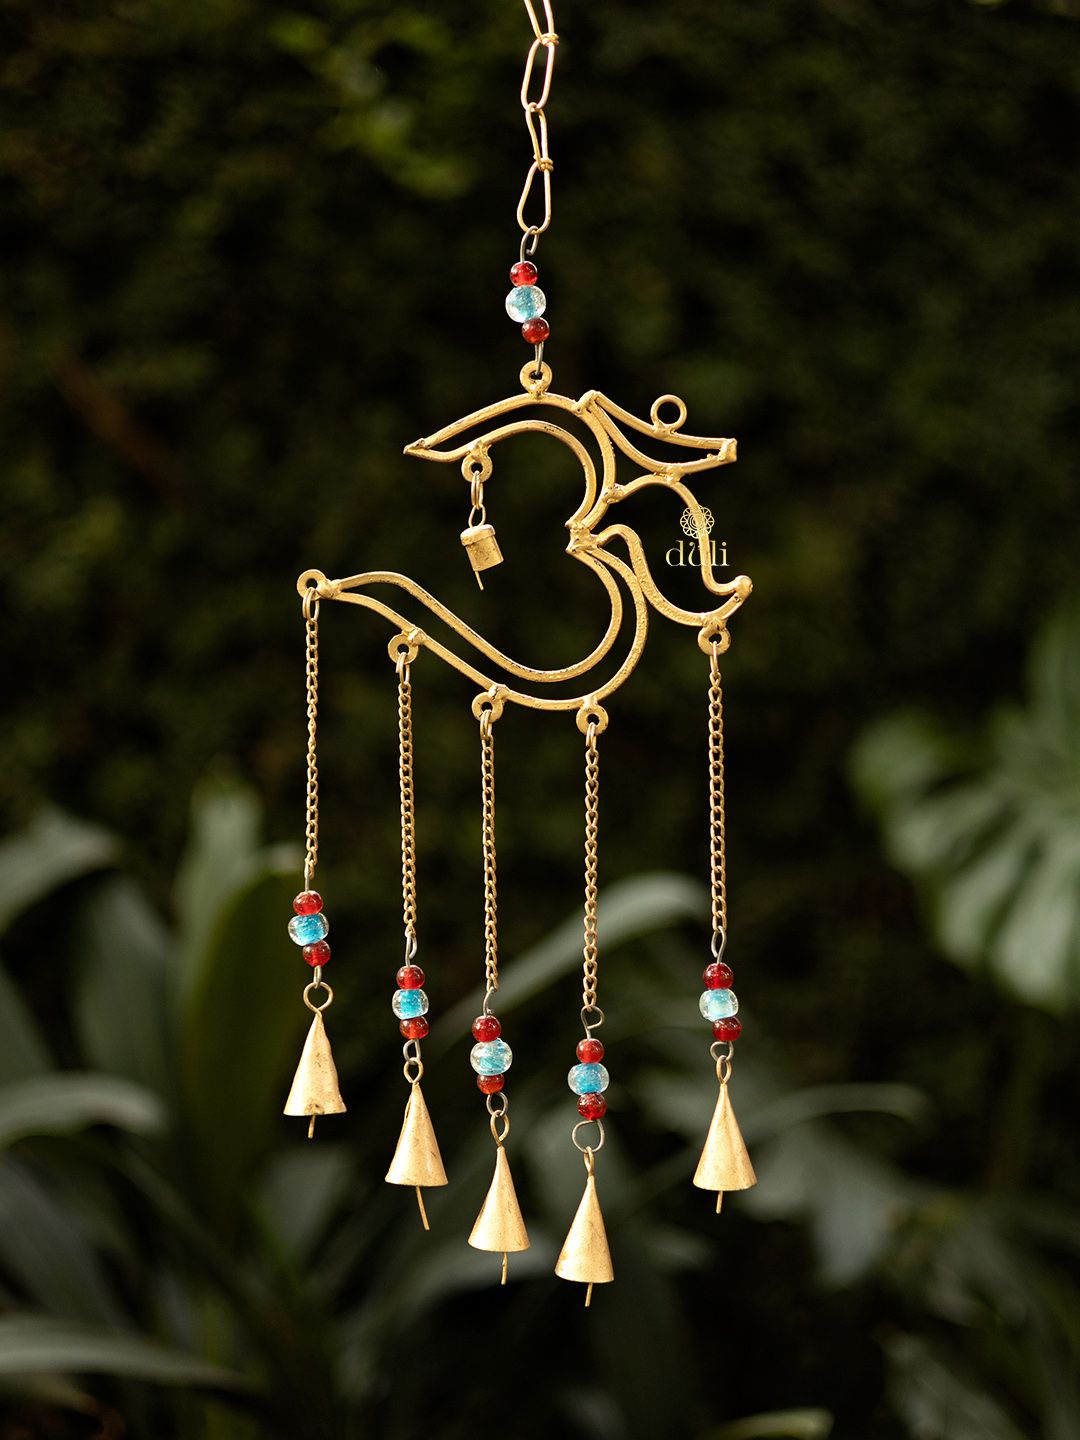 DULI Gold-Toned & Red Om Shaped Wall Hanging Wind Chime with Hanging Bells Price in India